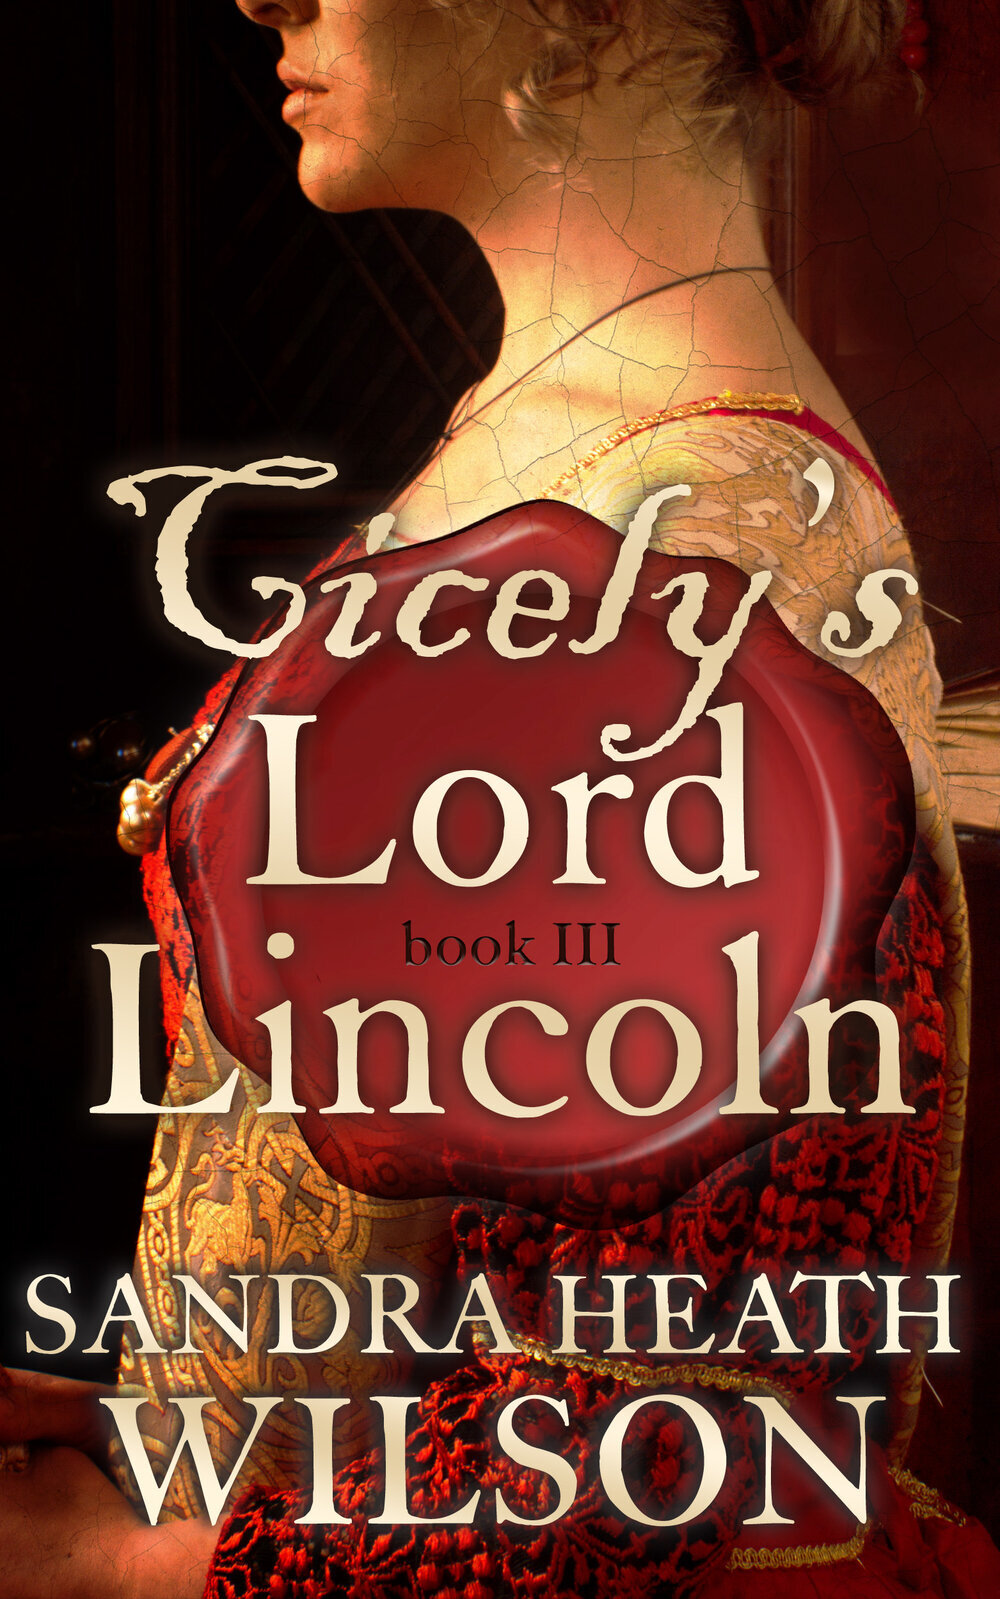 Cicely's+Lord+Lincoln+publish+cover.jpg